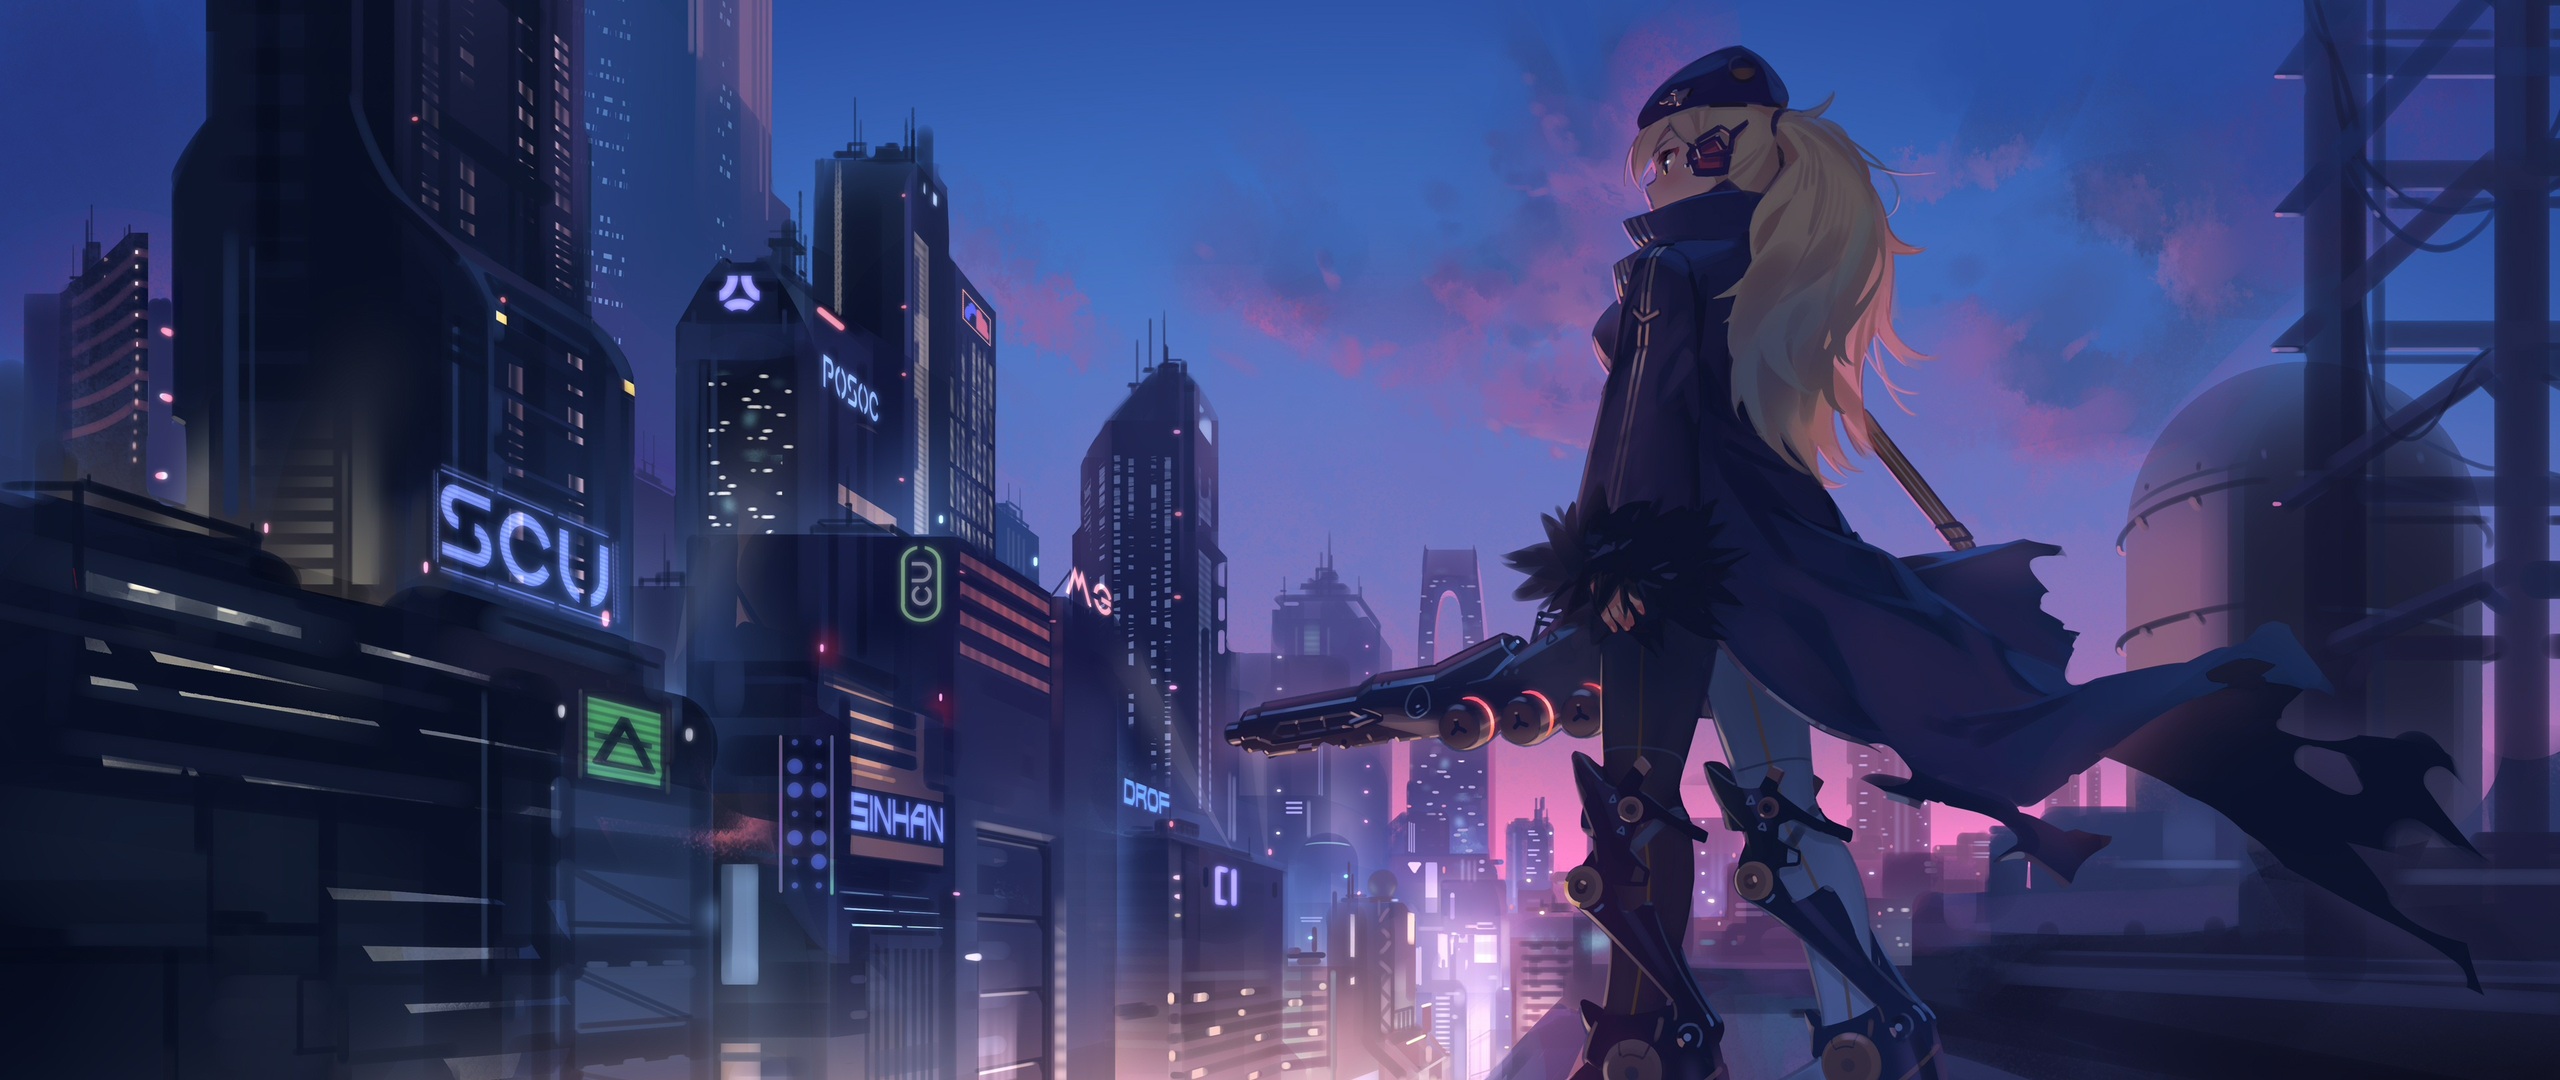 2560x1080 Anime Girl In City 4k 2560x1080 Resolution Hd 4k Wallpapers Images Backgrounds Photos And Pictures